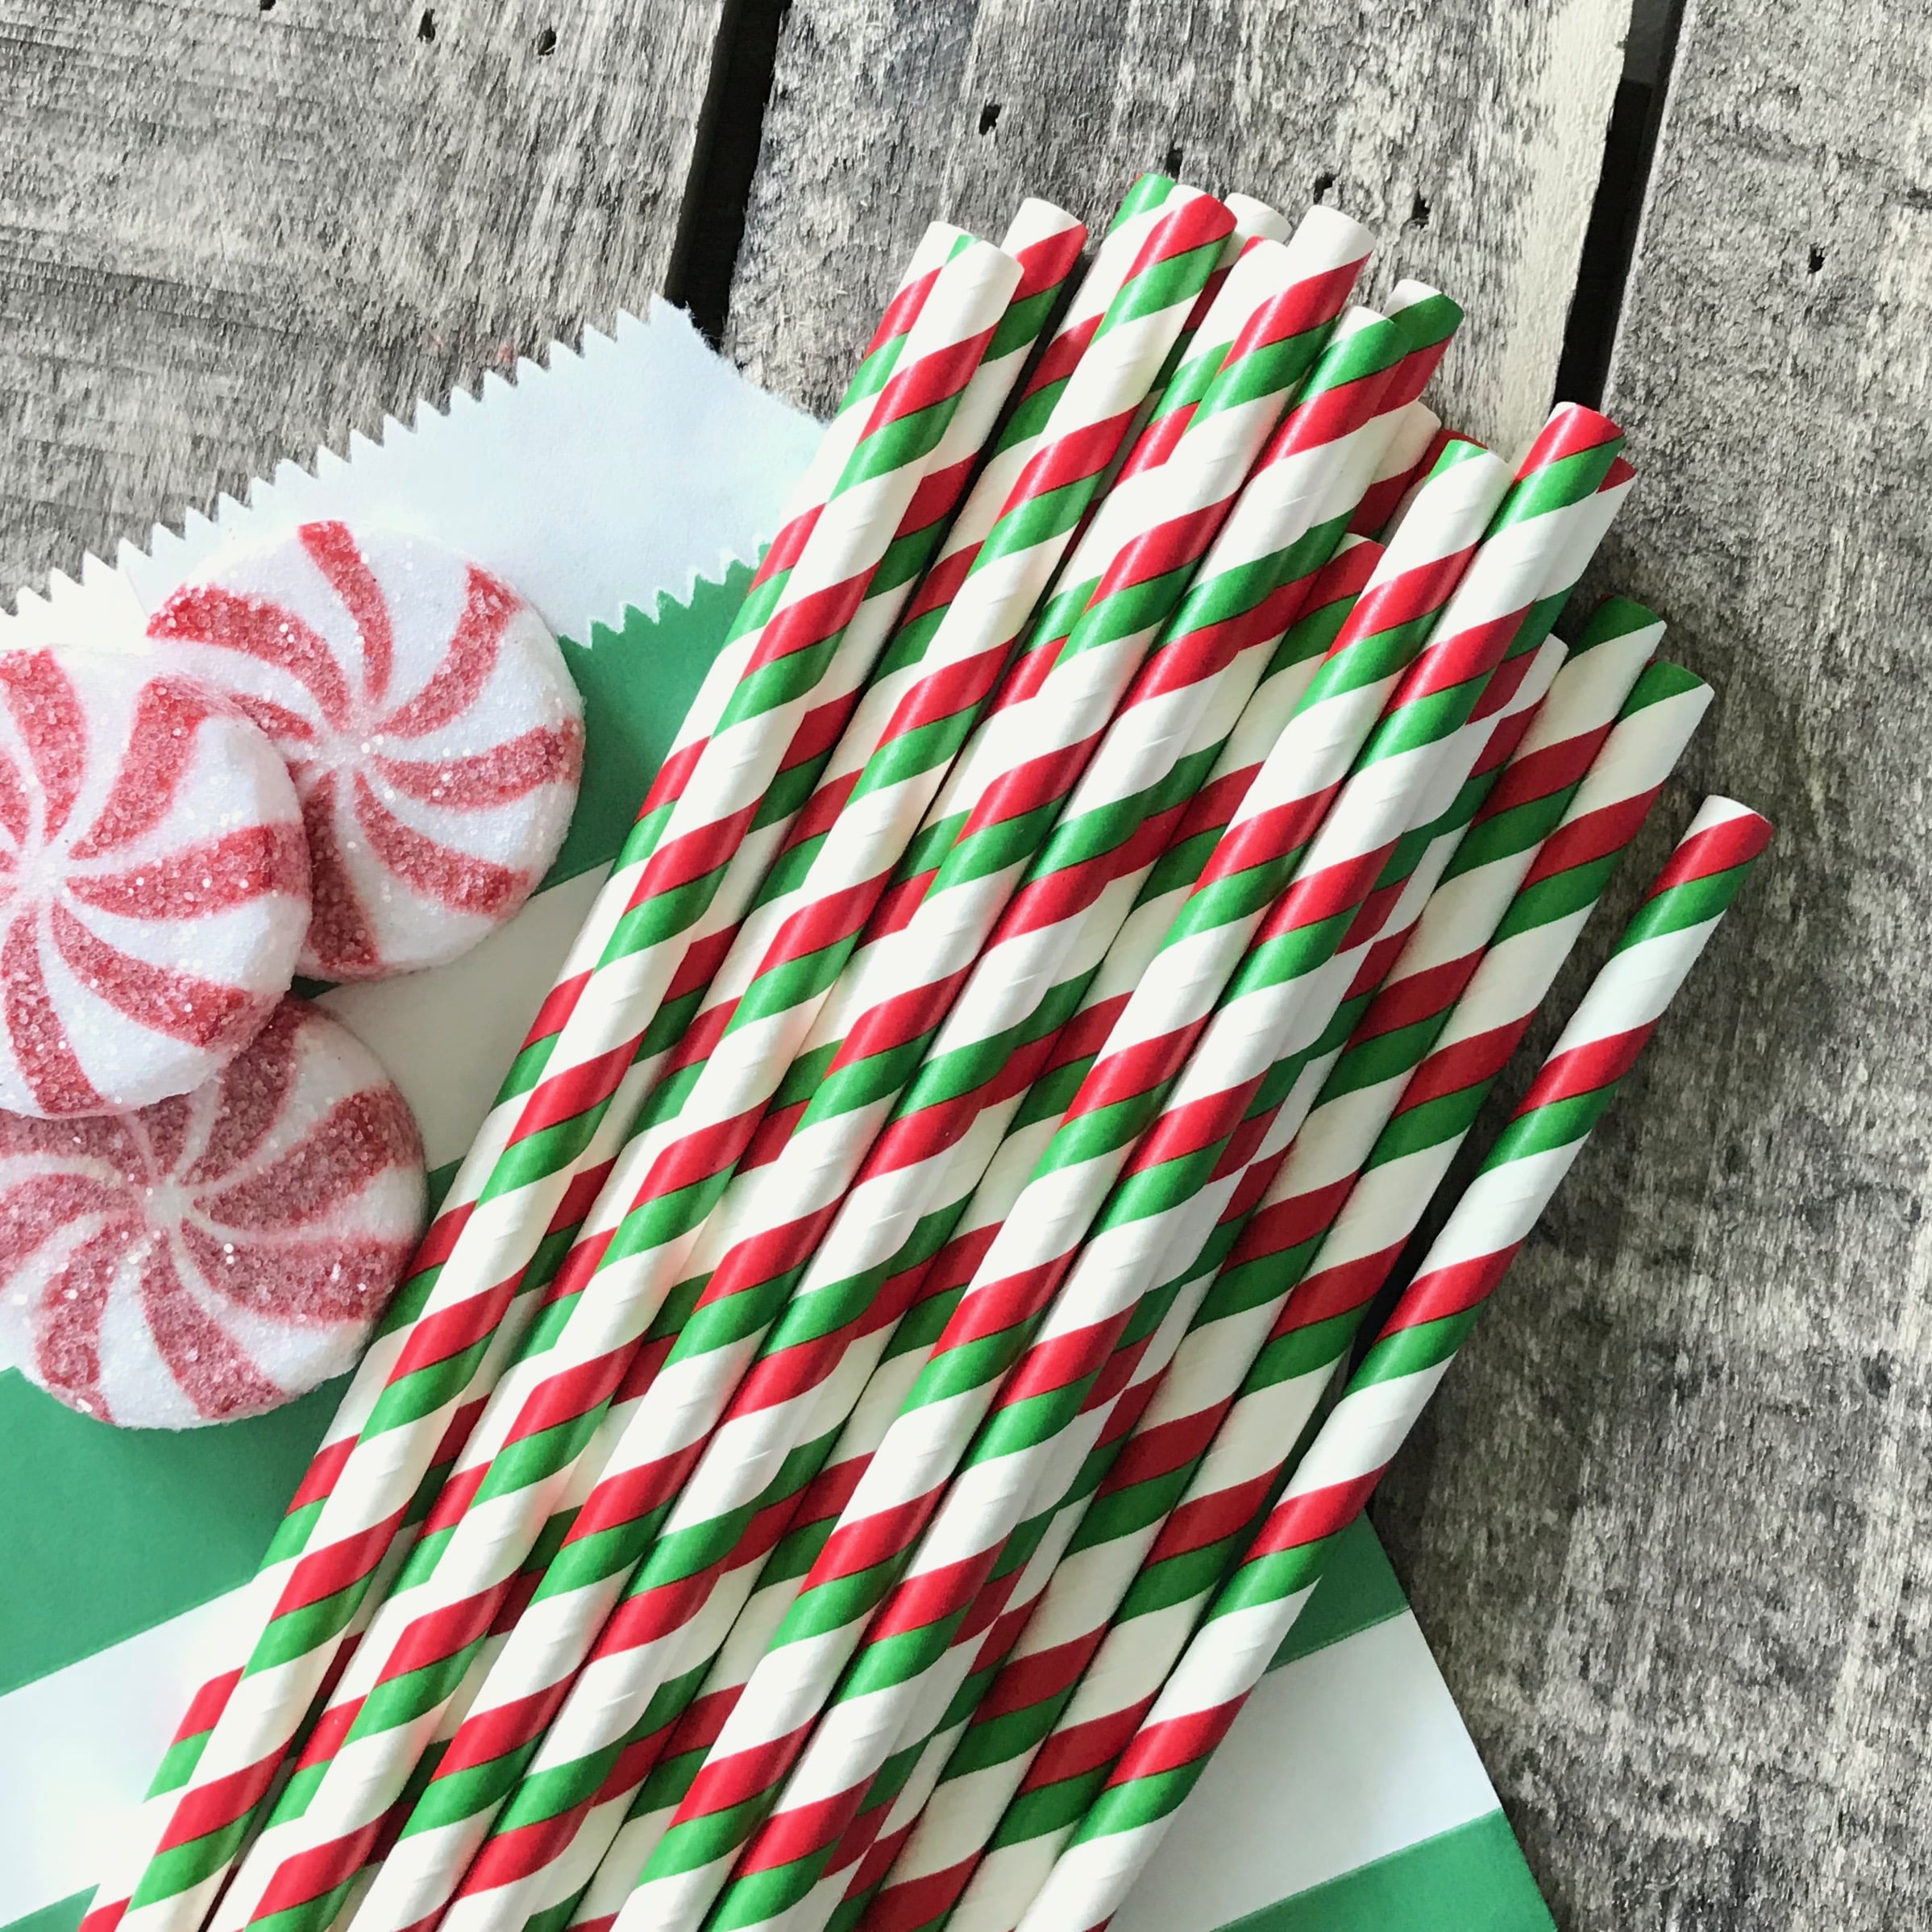 24 Christmas Straws // Paper Straws // Paper Christmas Straws // Christmas  Paper Straws // Red Paper Straws / Green Paper Straws / Red Green 